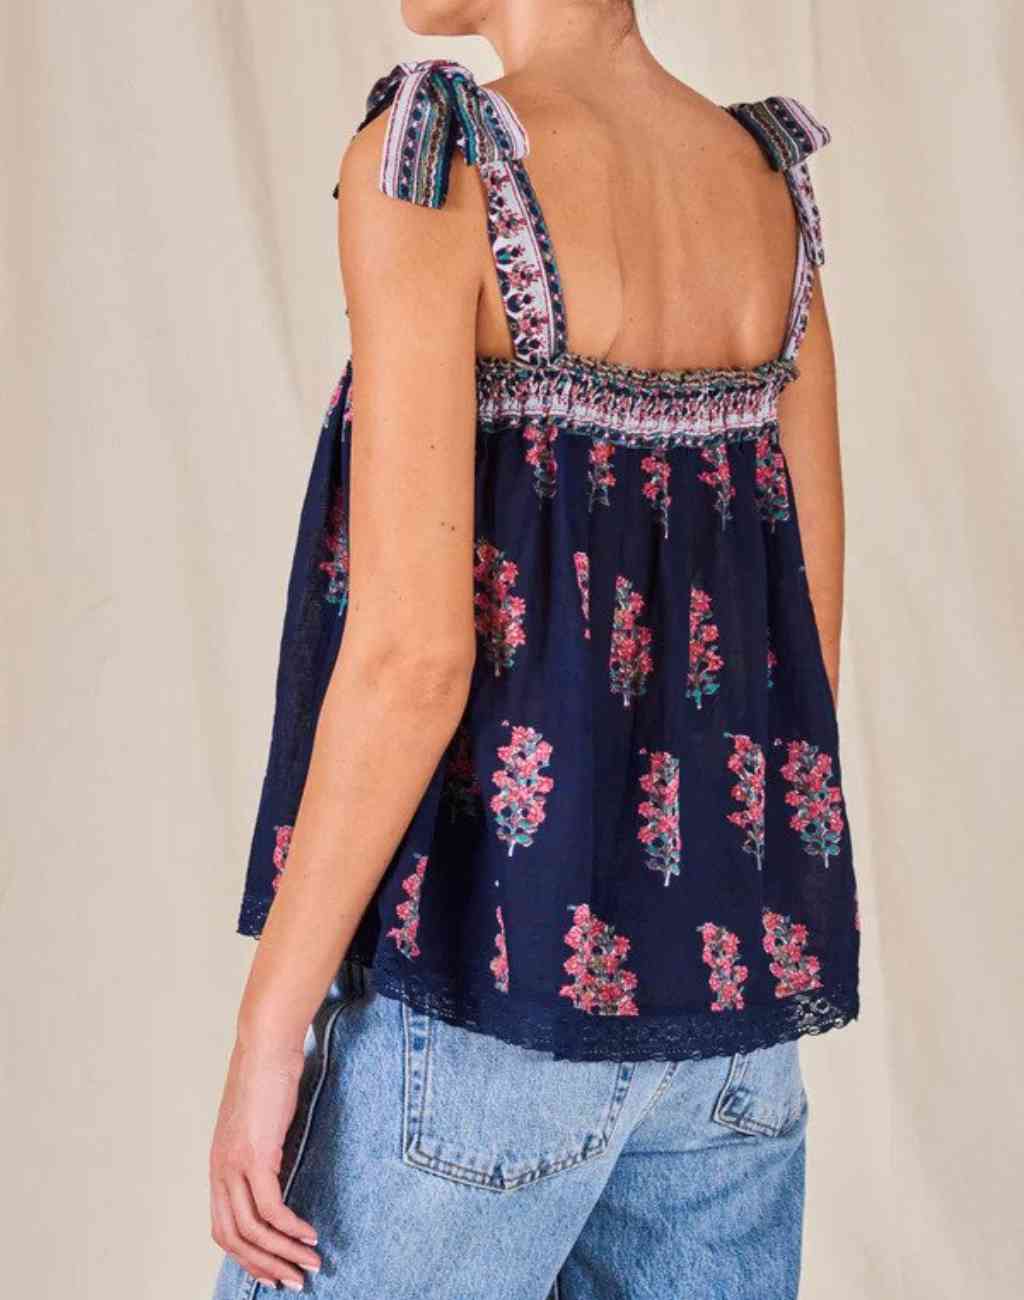 Block Print Flori Camisole with Shoulder Ties - Visit Nifty M.A.B.E. 